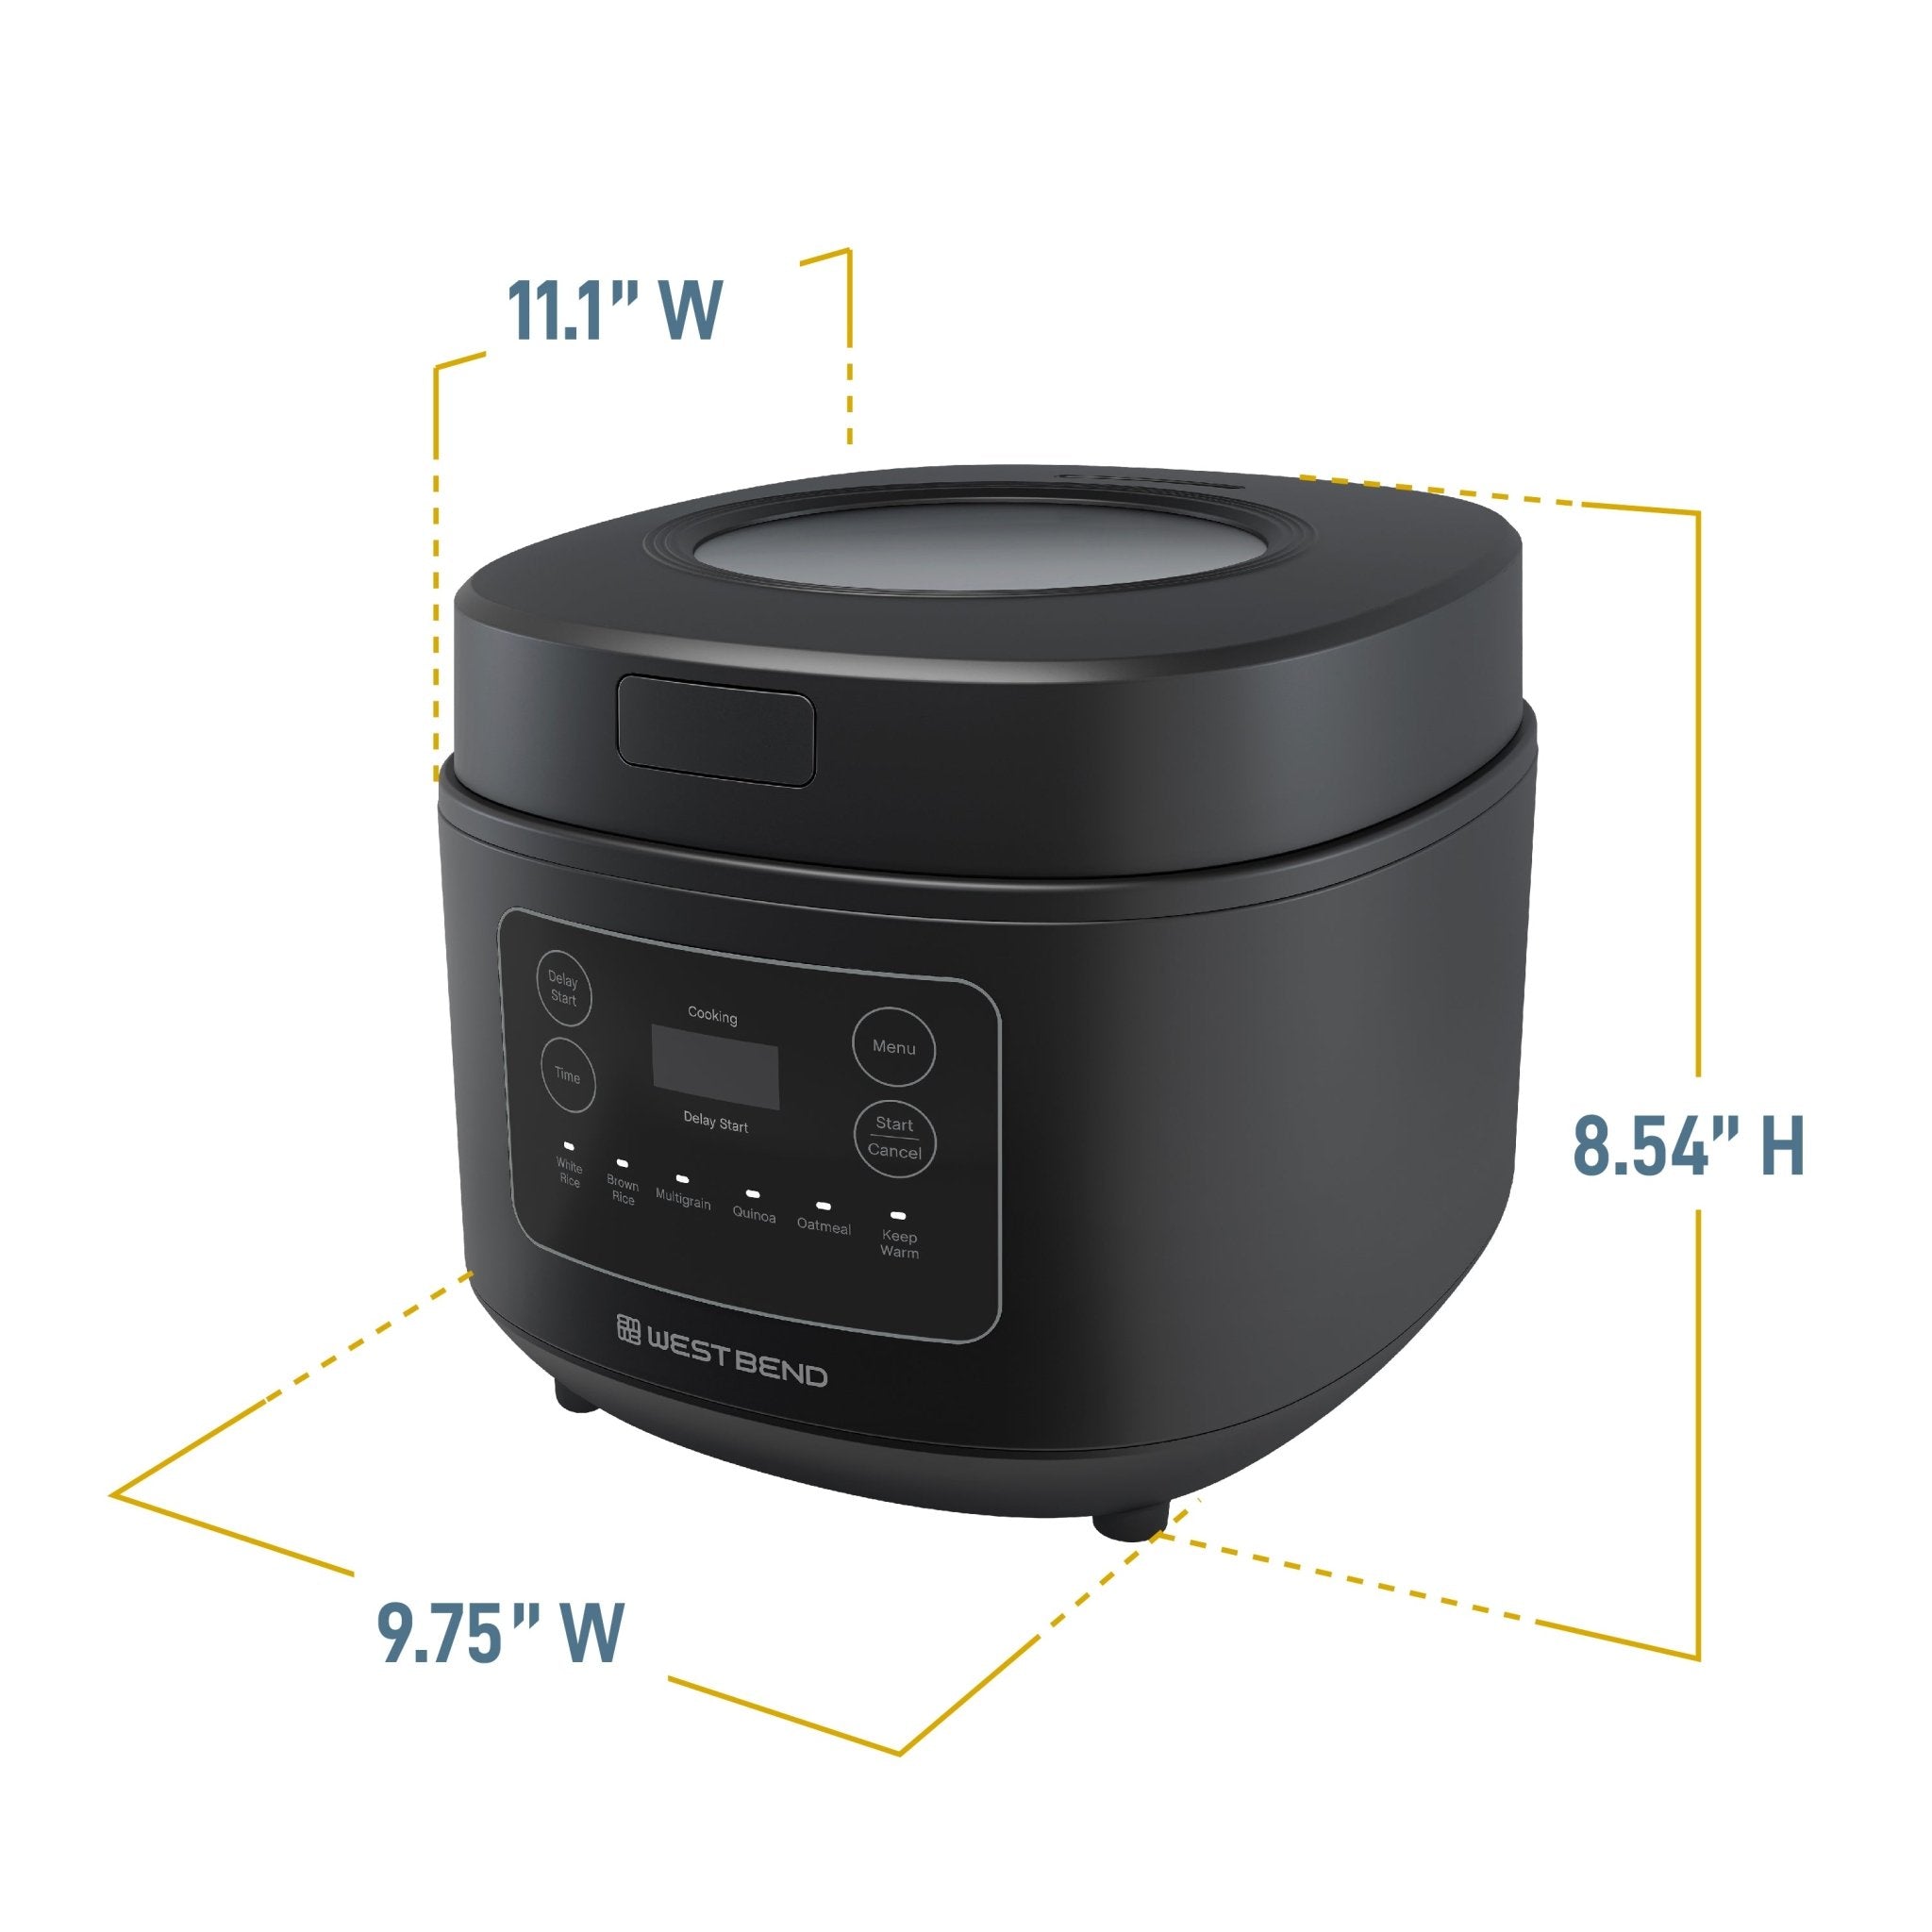 Cute electric cooker household mini multifunctional rice cooker